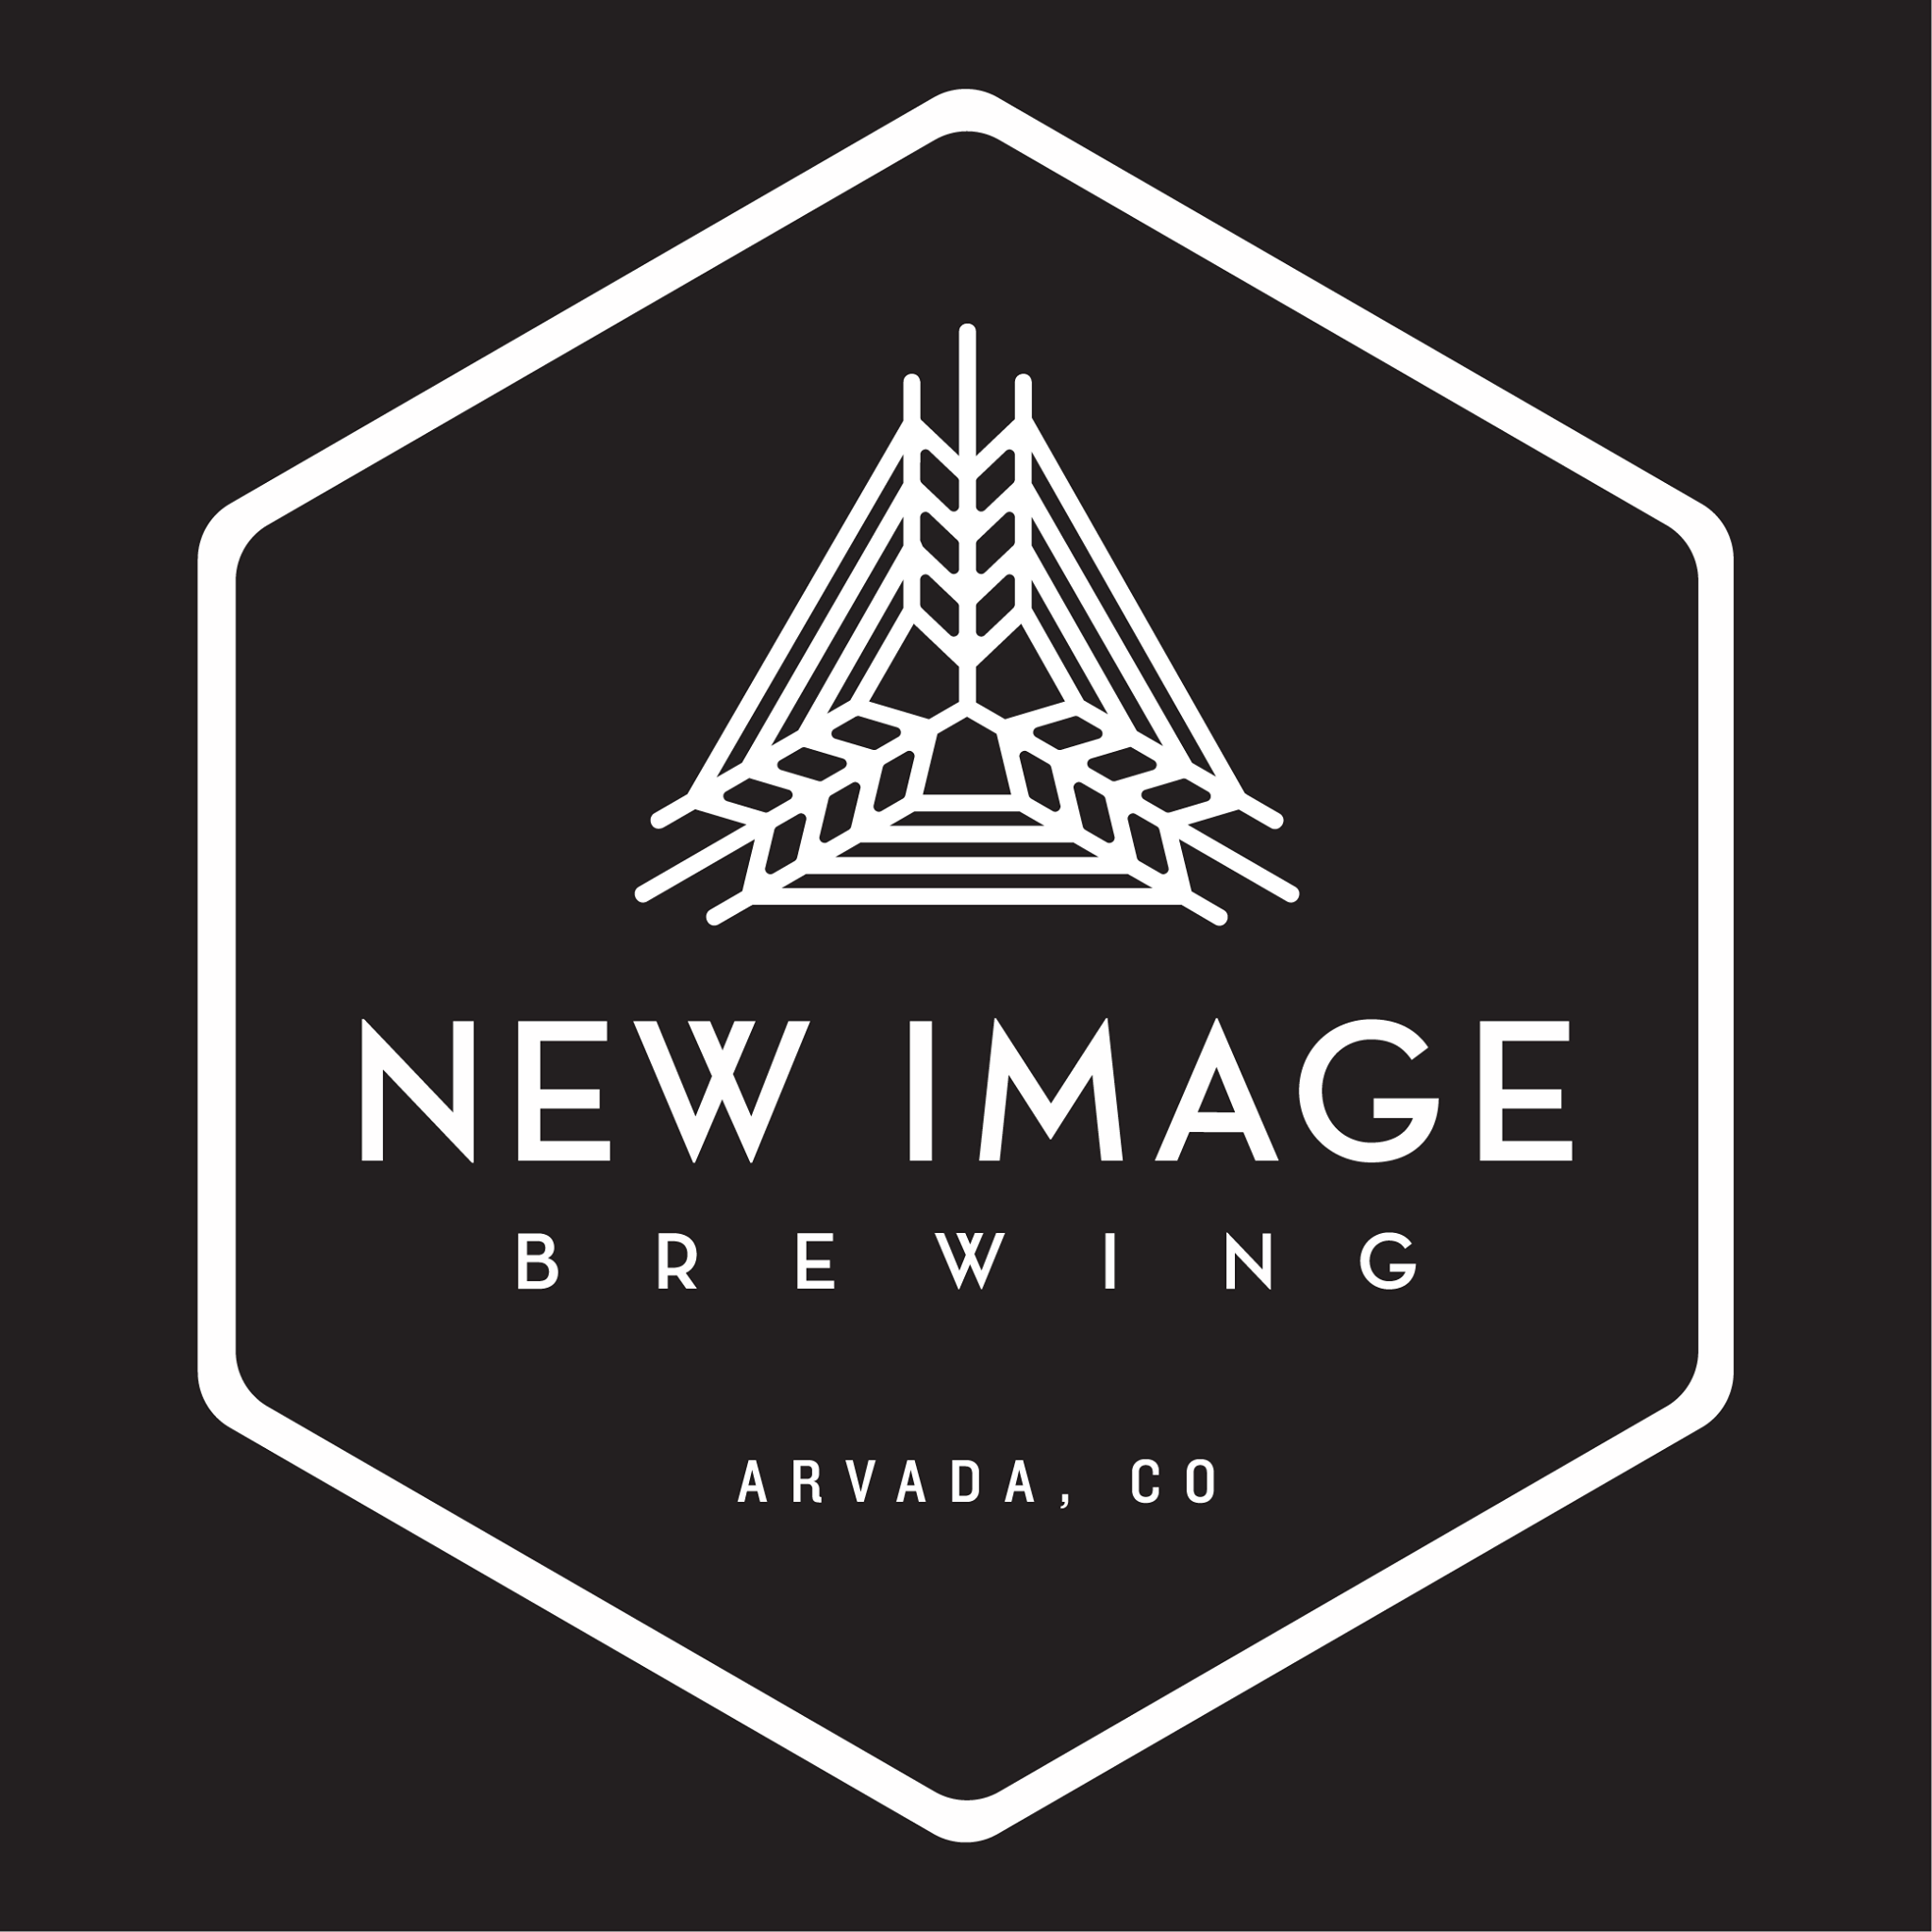 New Image Brewing Company